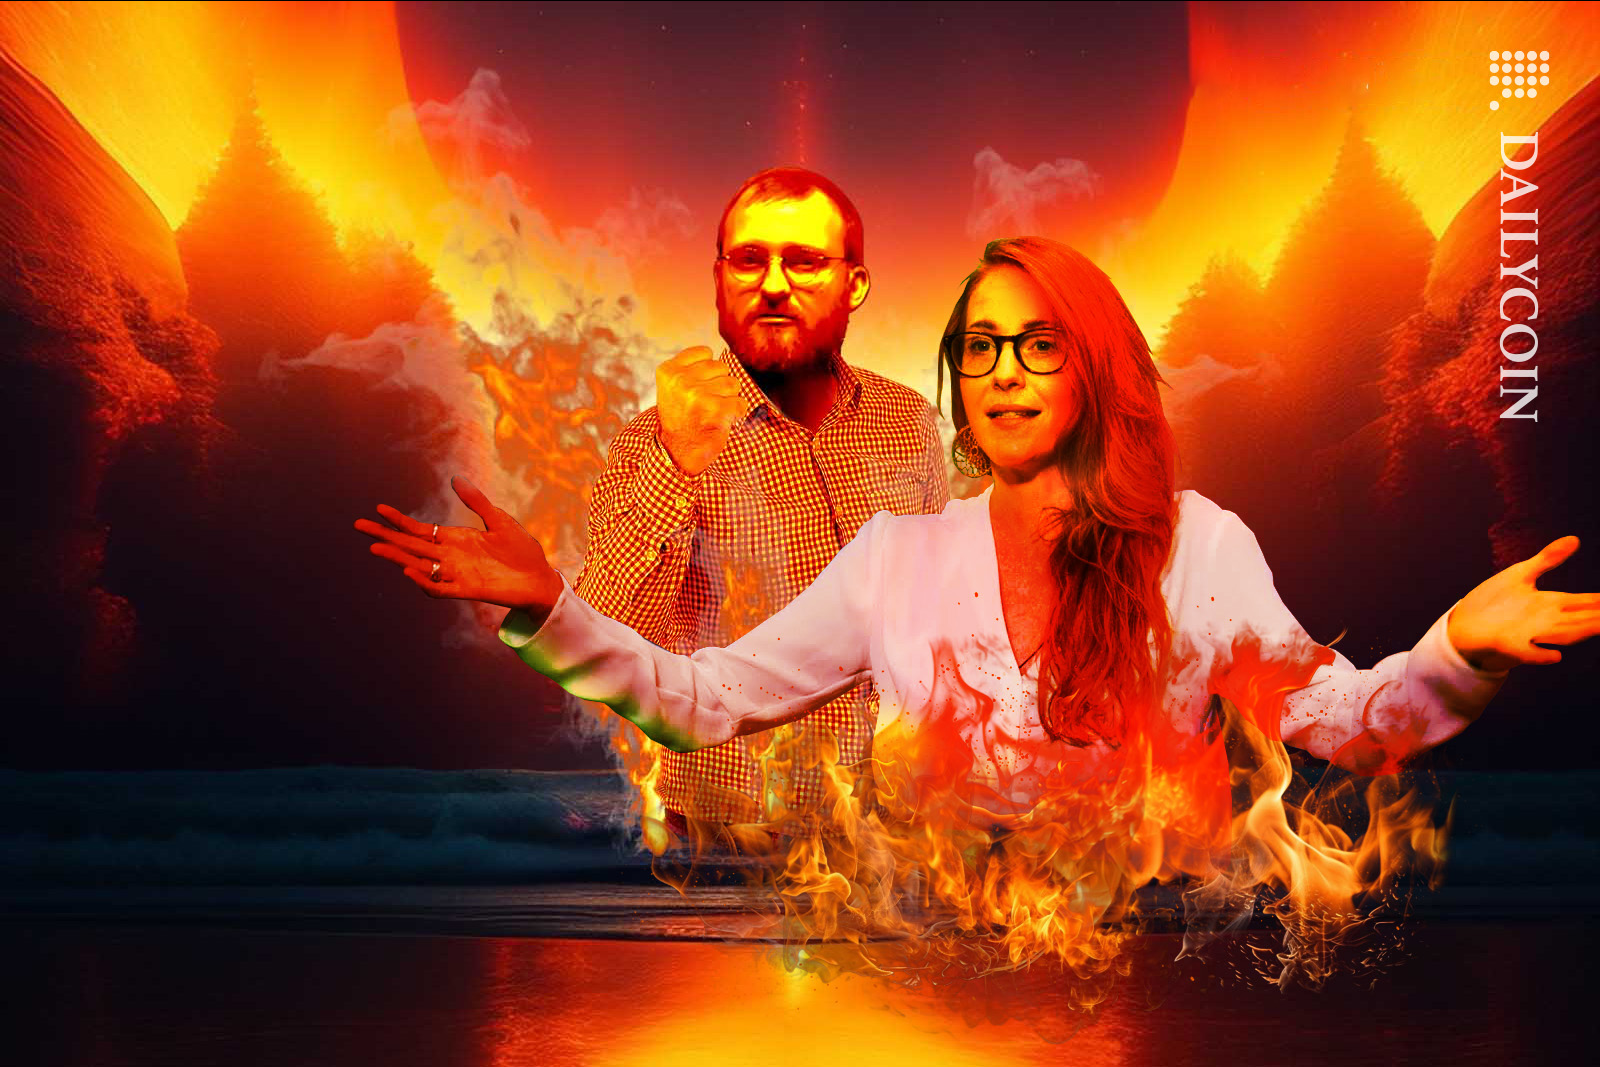 Charles Hoskinson and Tamara Hassen appears to be upset whilst engulfed by fire.